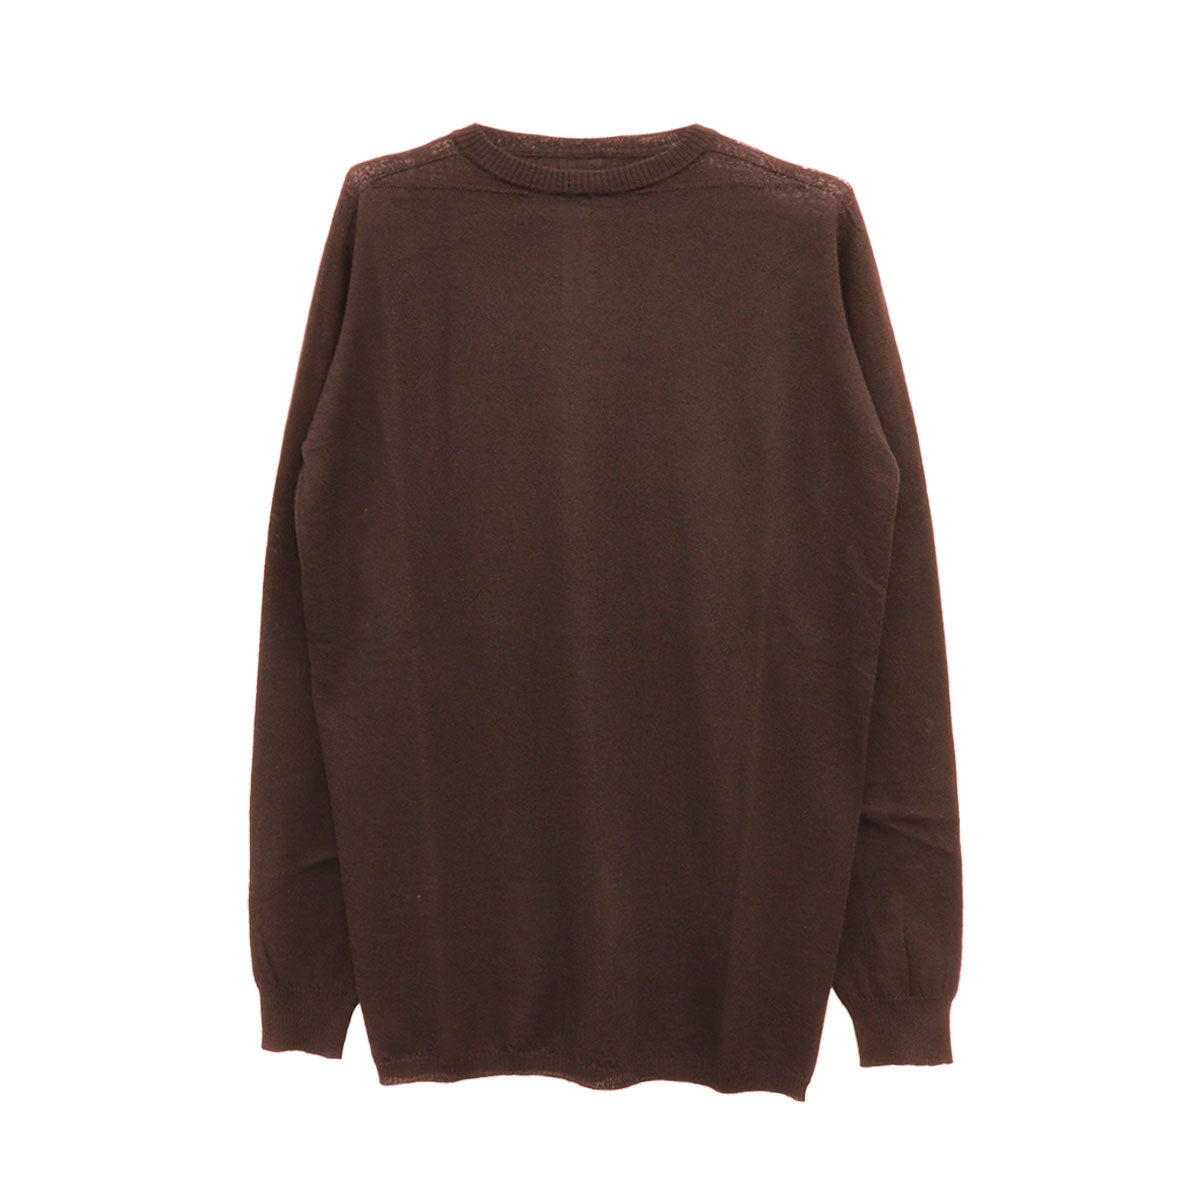 Overside OVERSIZED TURTLE ROUND NECK | Why are you here?